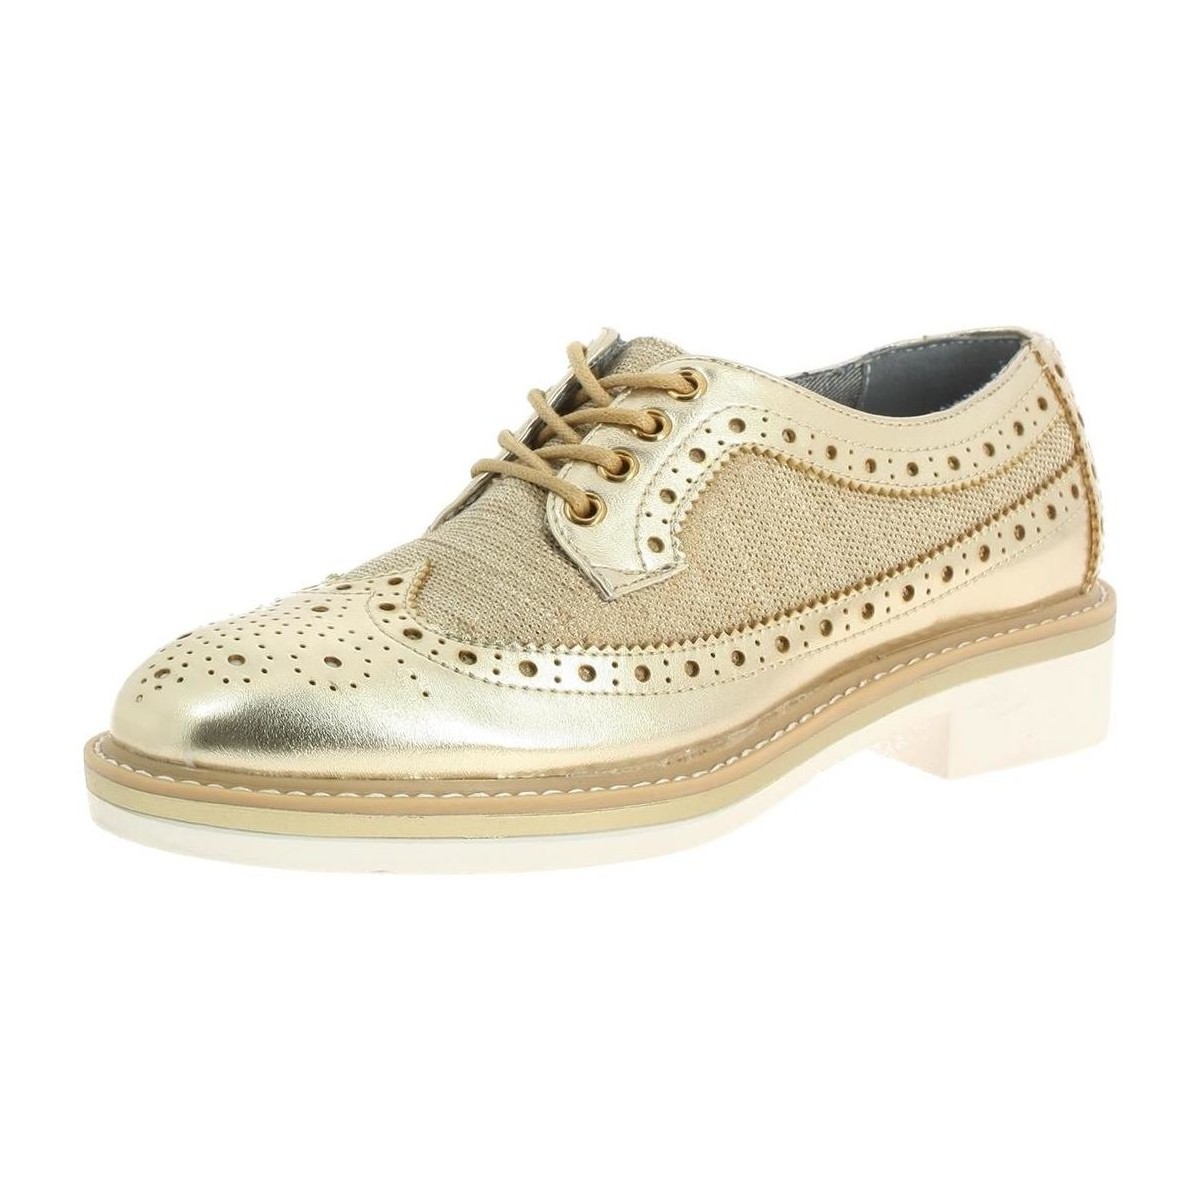 Chaussures Femme Loints Of Holla CHICCA Beige